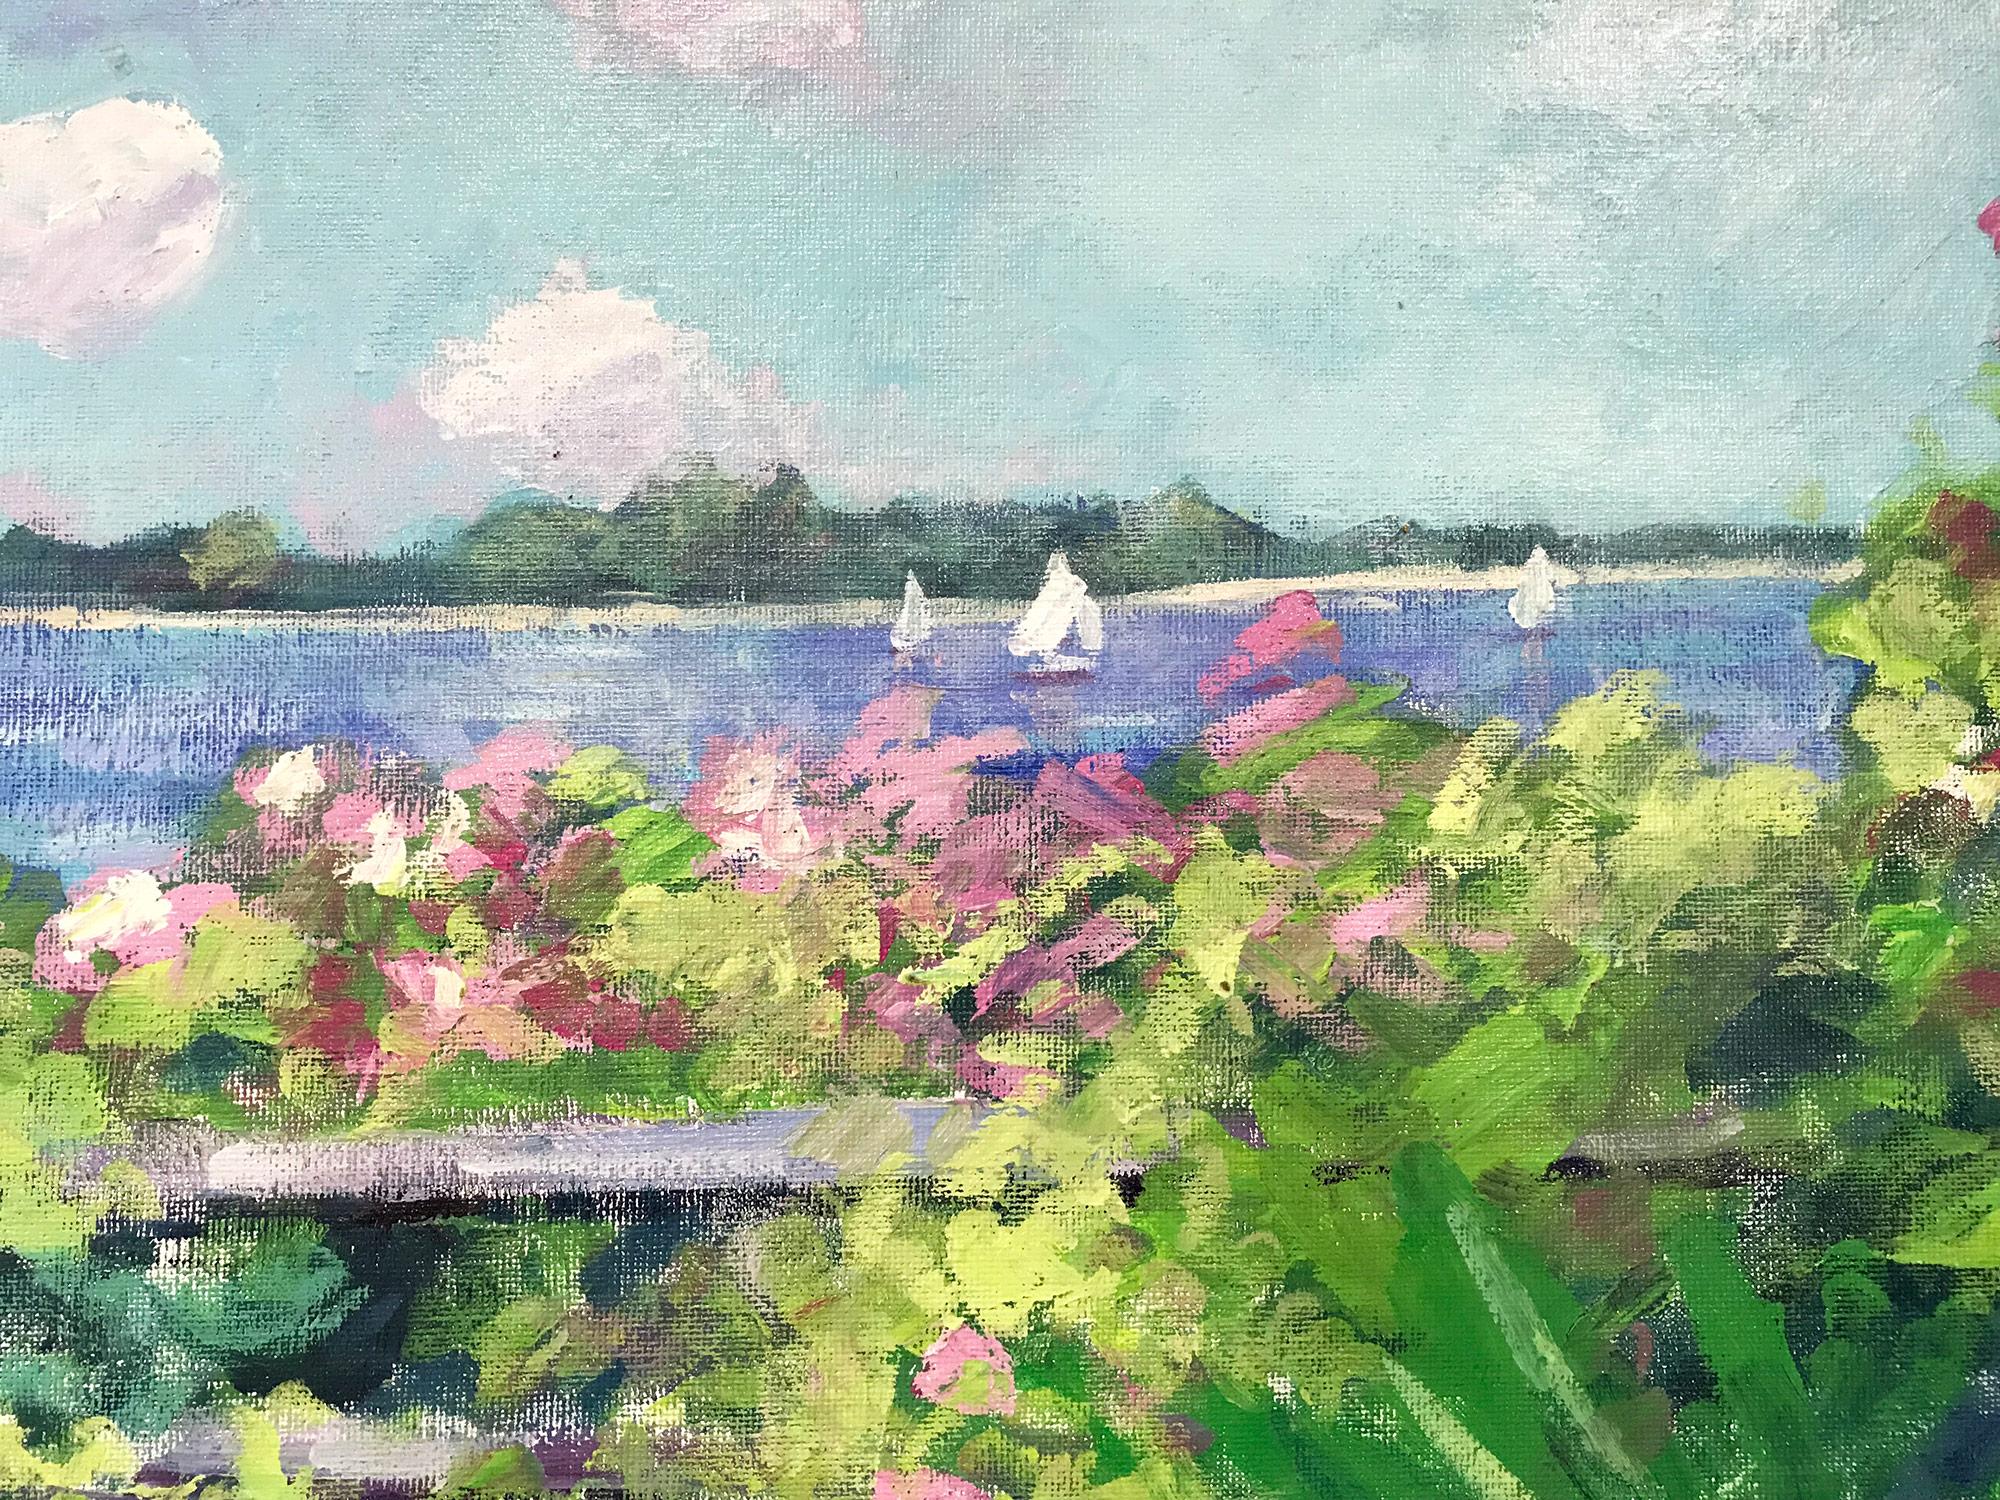 Crimmins is known for his colorfully playful and whimsical impressionistic scenes from the 20th Century. This painting is a wonderful display of his charming paints with a view of sailboats over a courtyard garden setting with plush flowers near a